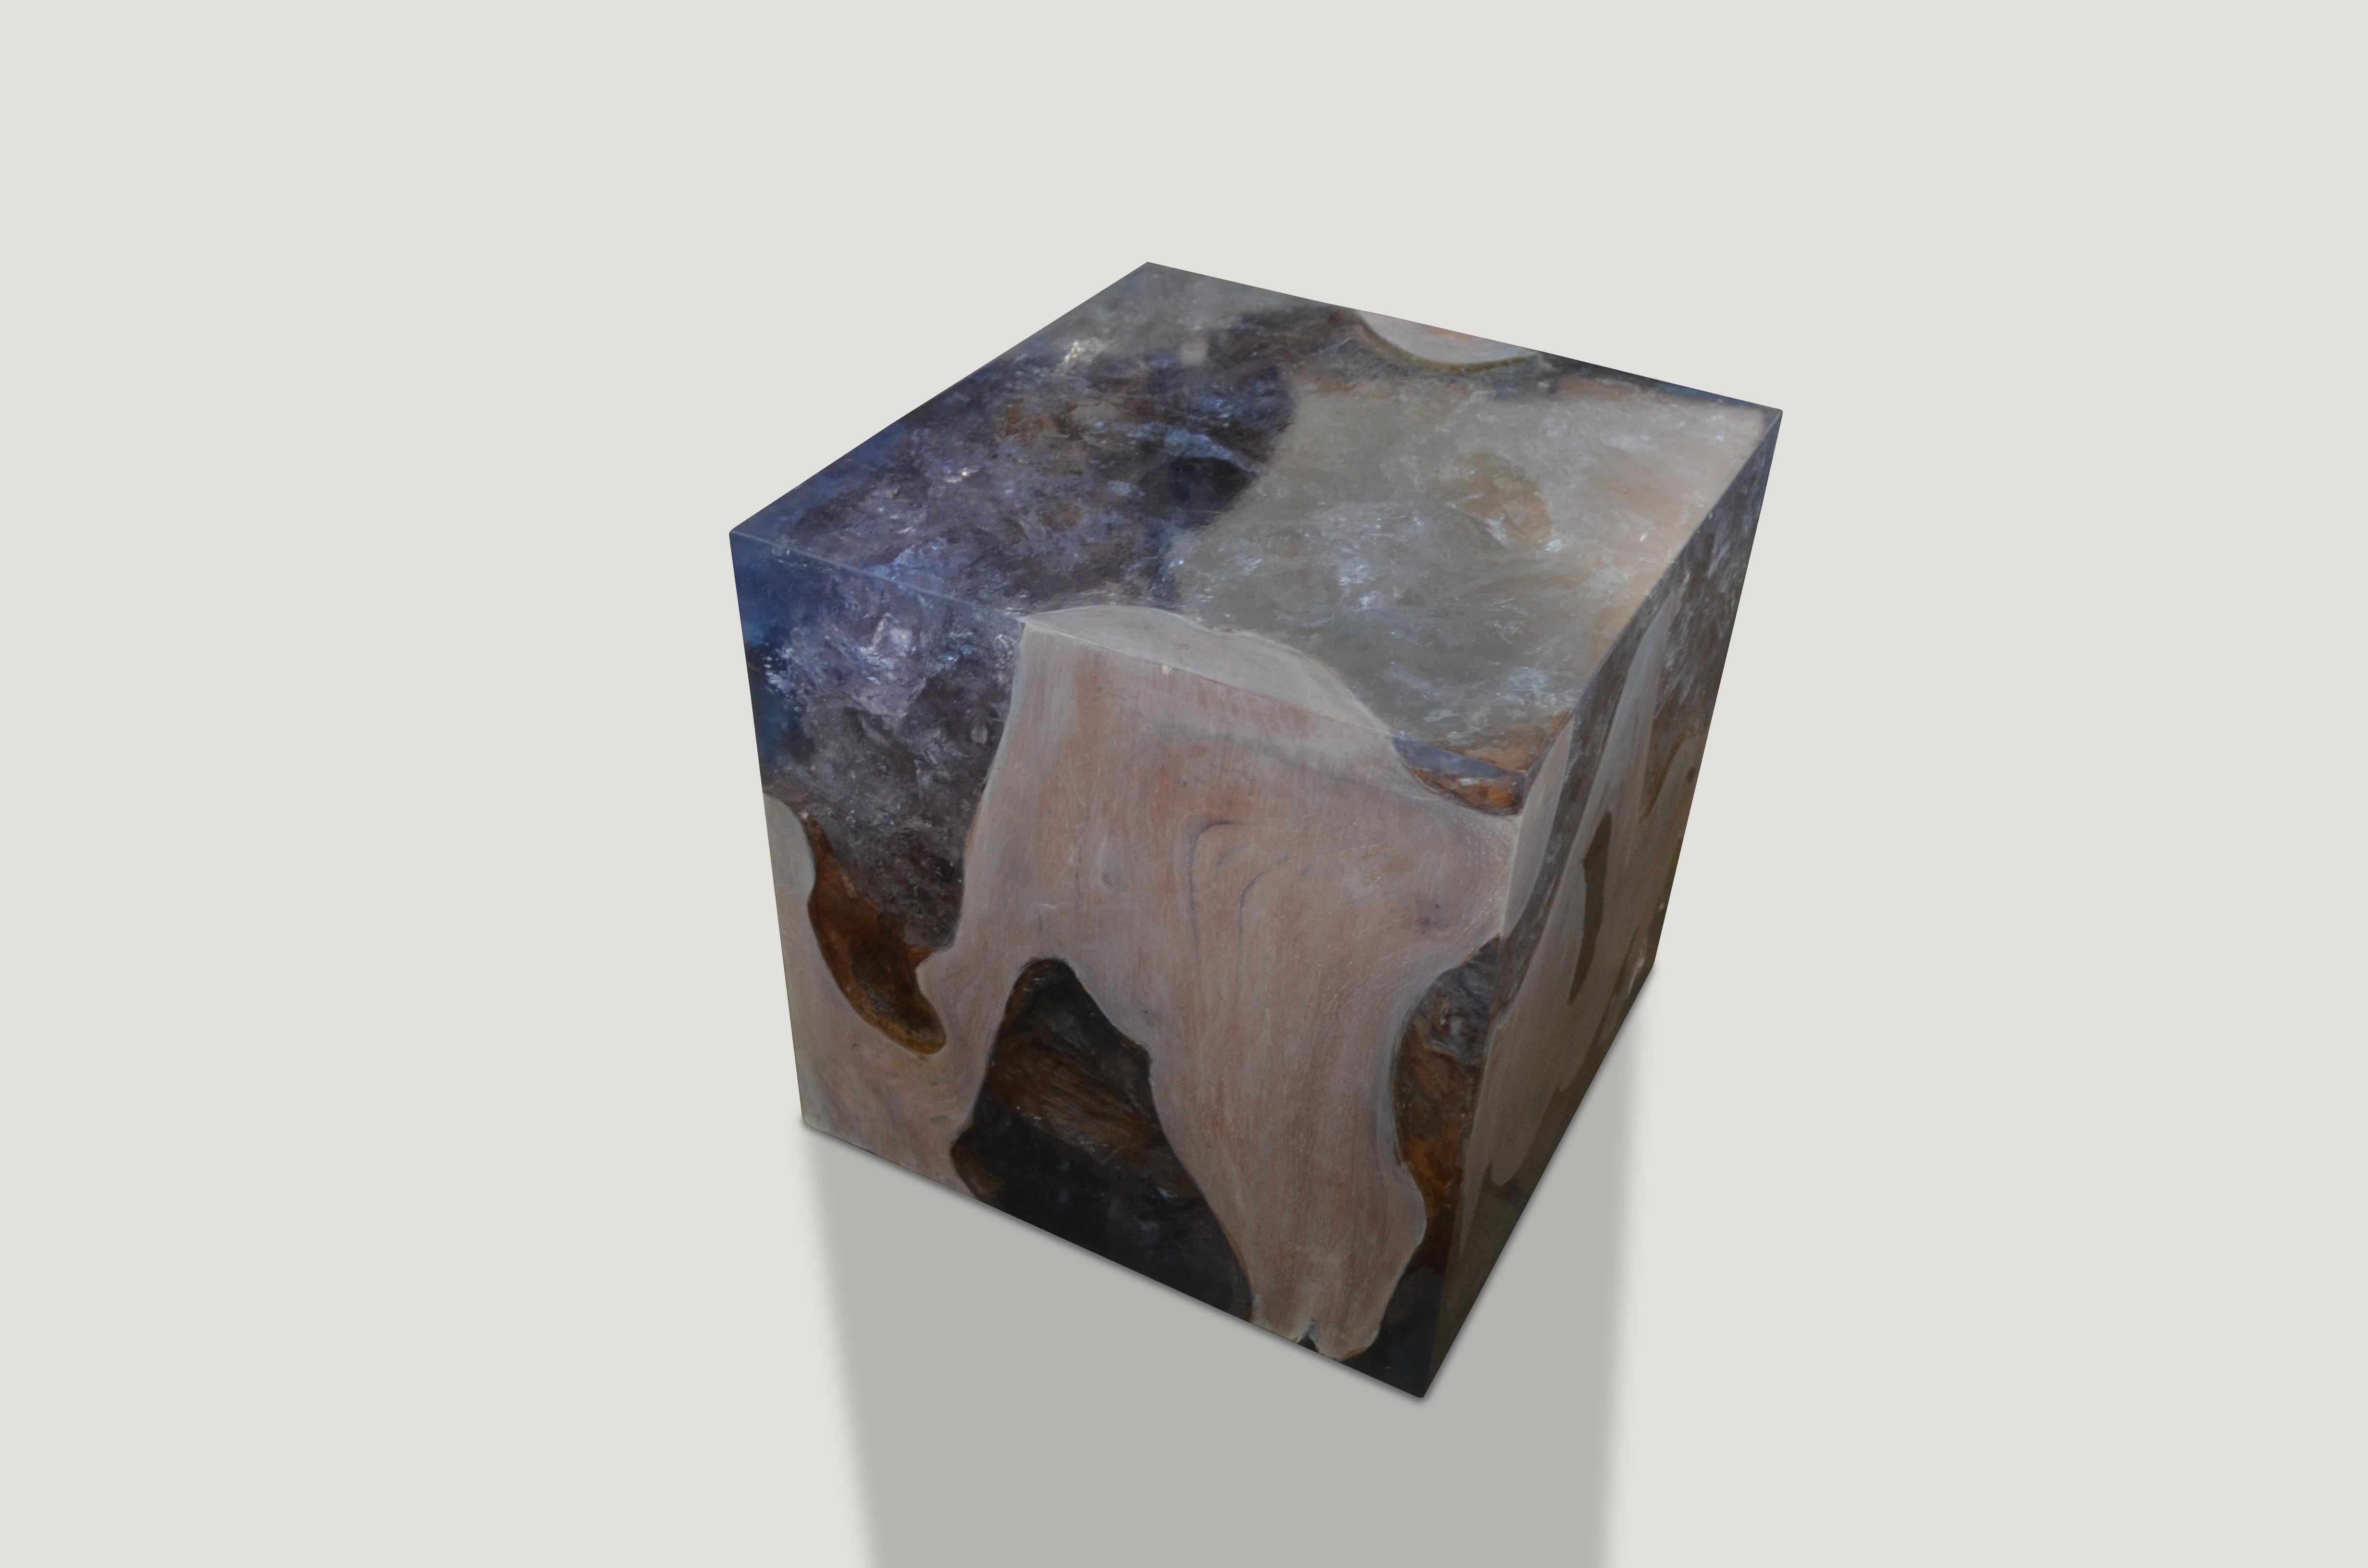 The St. Barts side table is a unique variation of the teak and cracked resin cube. Ice blue or aqua resin is first cracked and added into the natural grooves of the bleached teak wood, sanded and finished with a high polish. Hand made from reclaimed